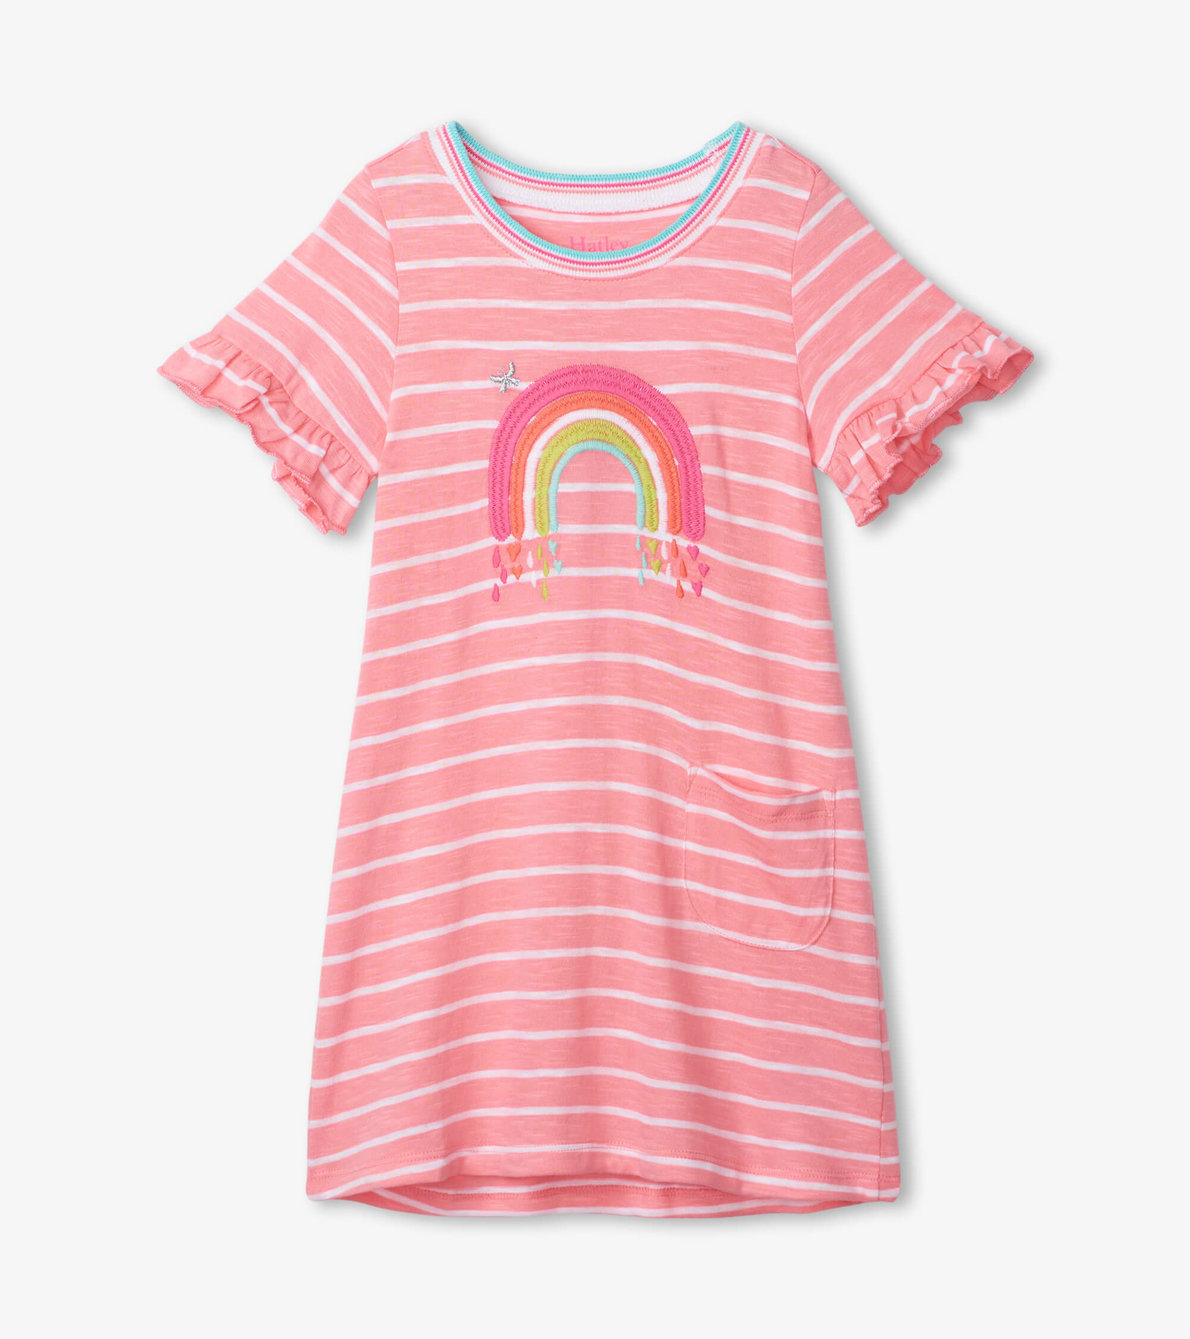 View larger image of Over The Rainbow Tee Shirt Dress